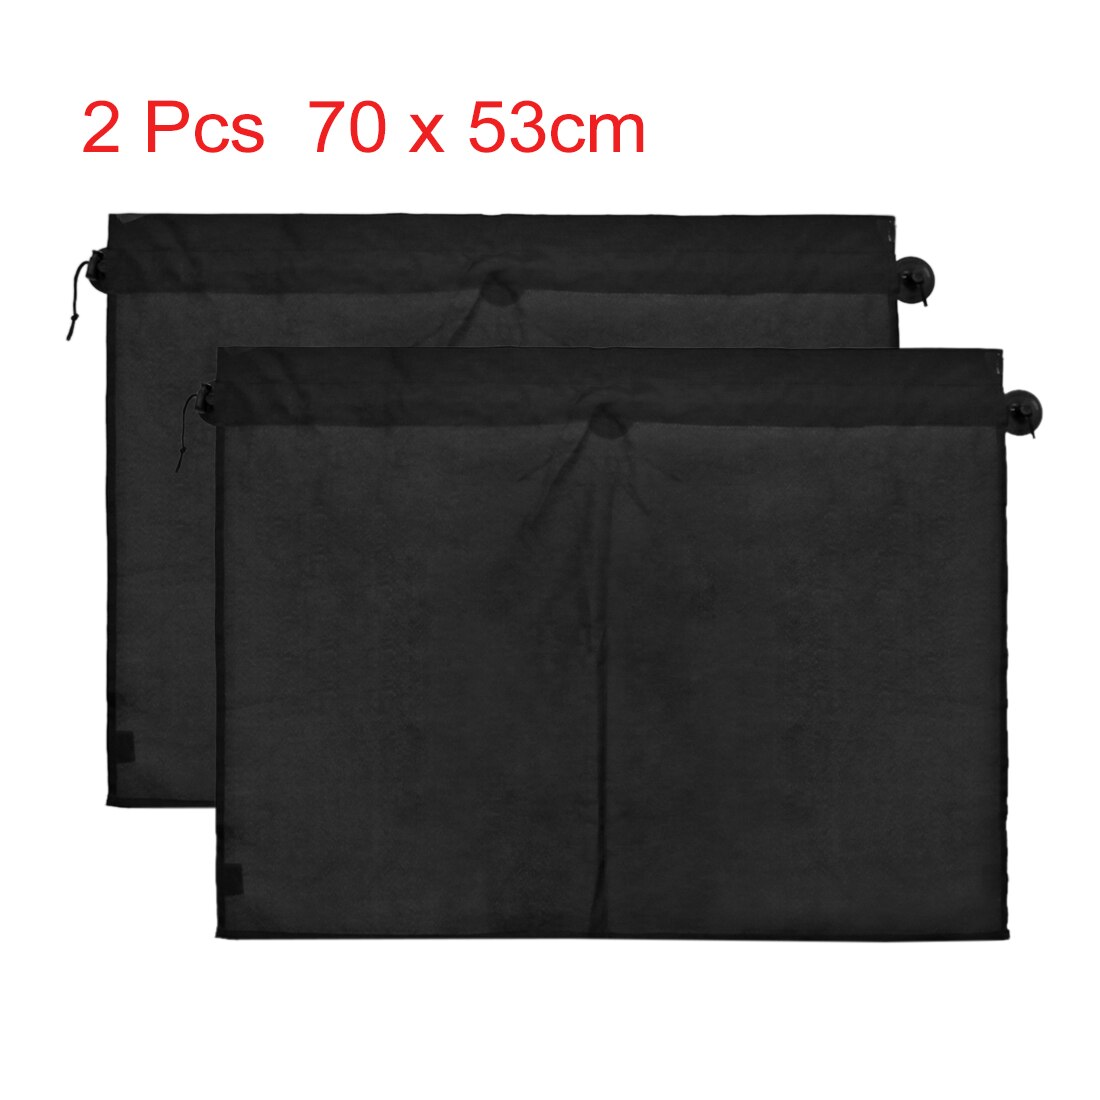 UV Protection Windscreen Cover for Car